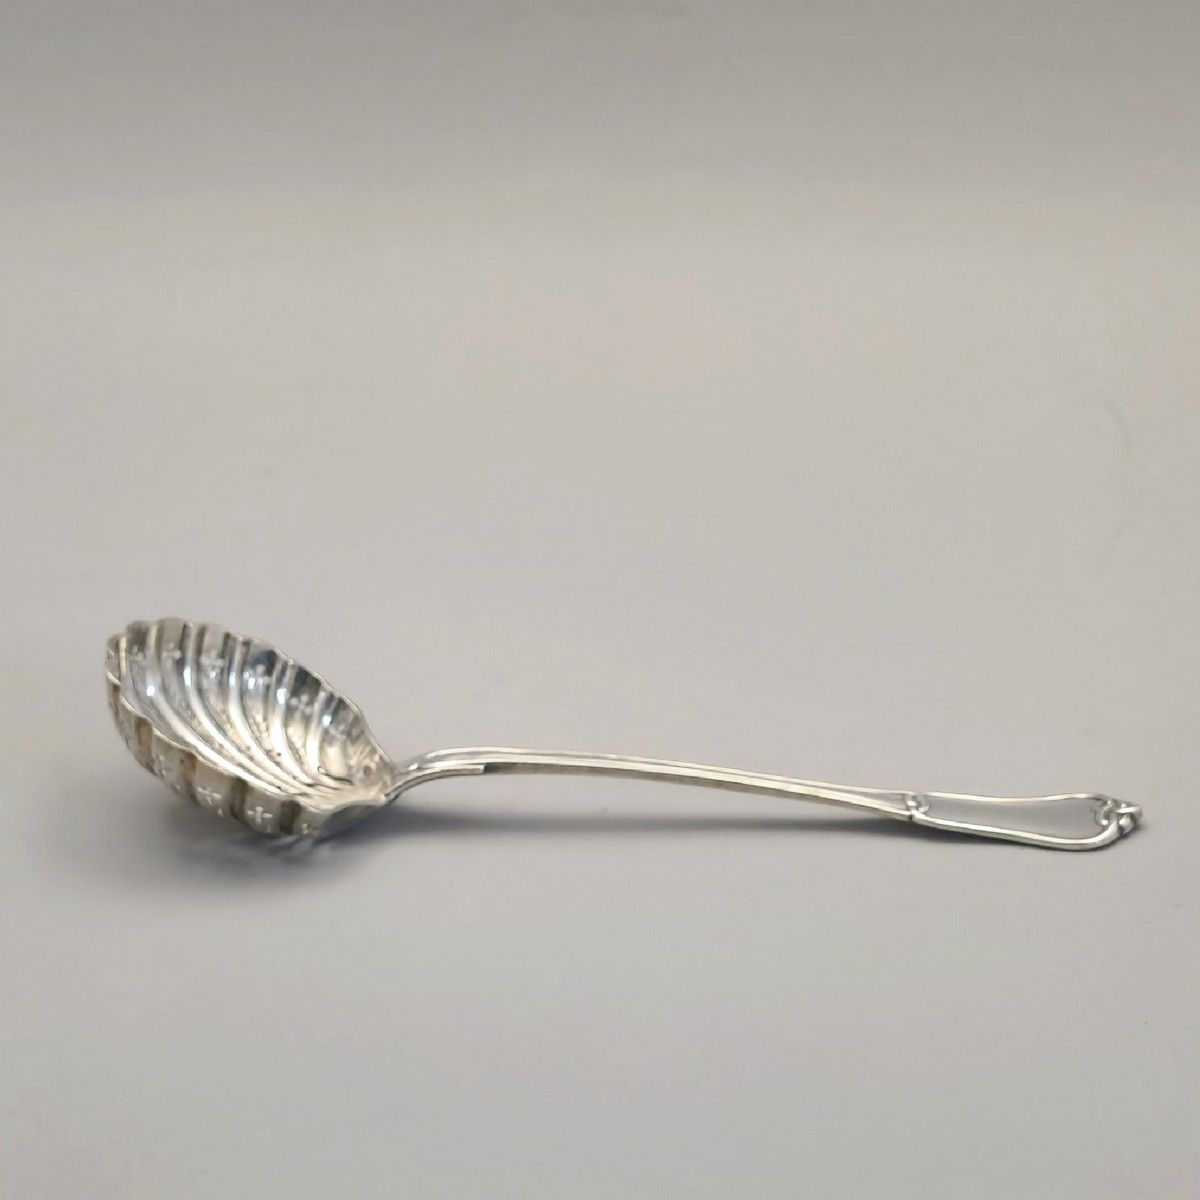 Null SAUPOUDRER SPOON in Minerva silver 950 Millièmes by THOMAS Circa 1860-1880,&hellip;